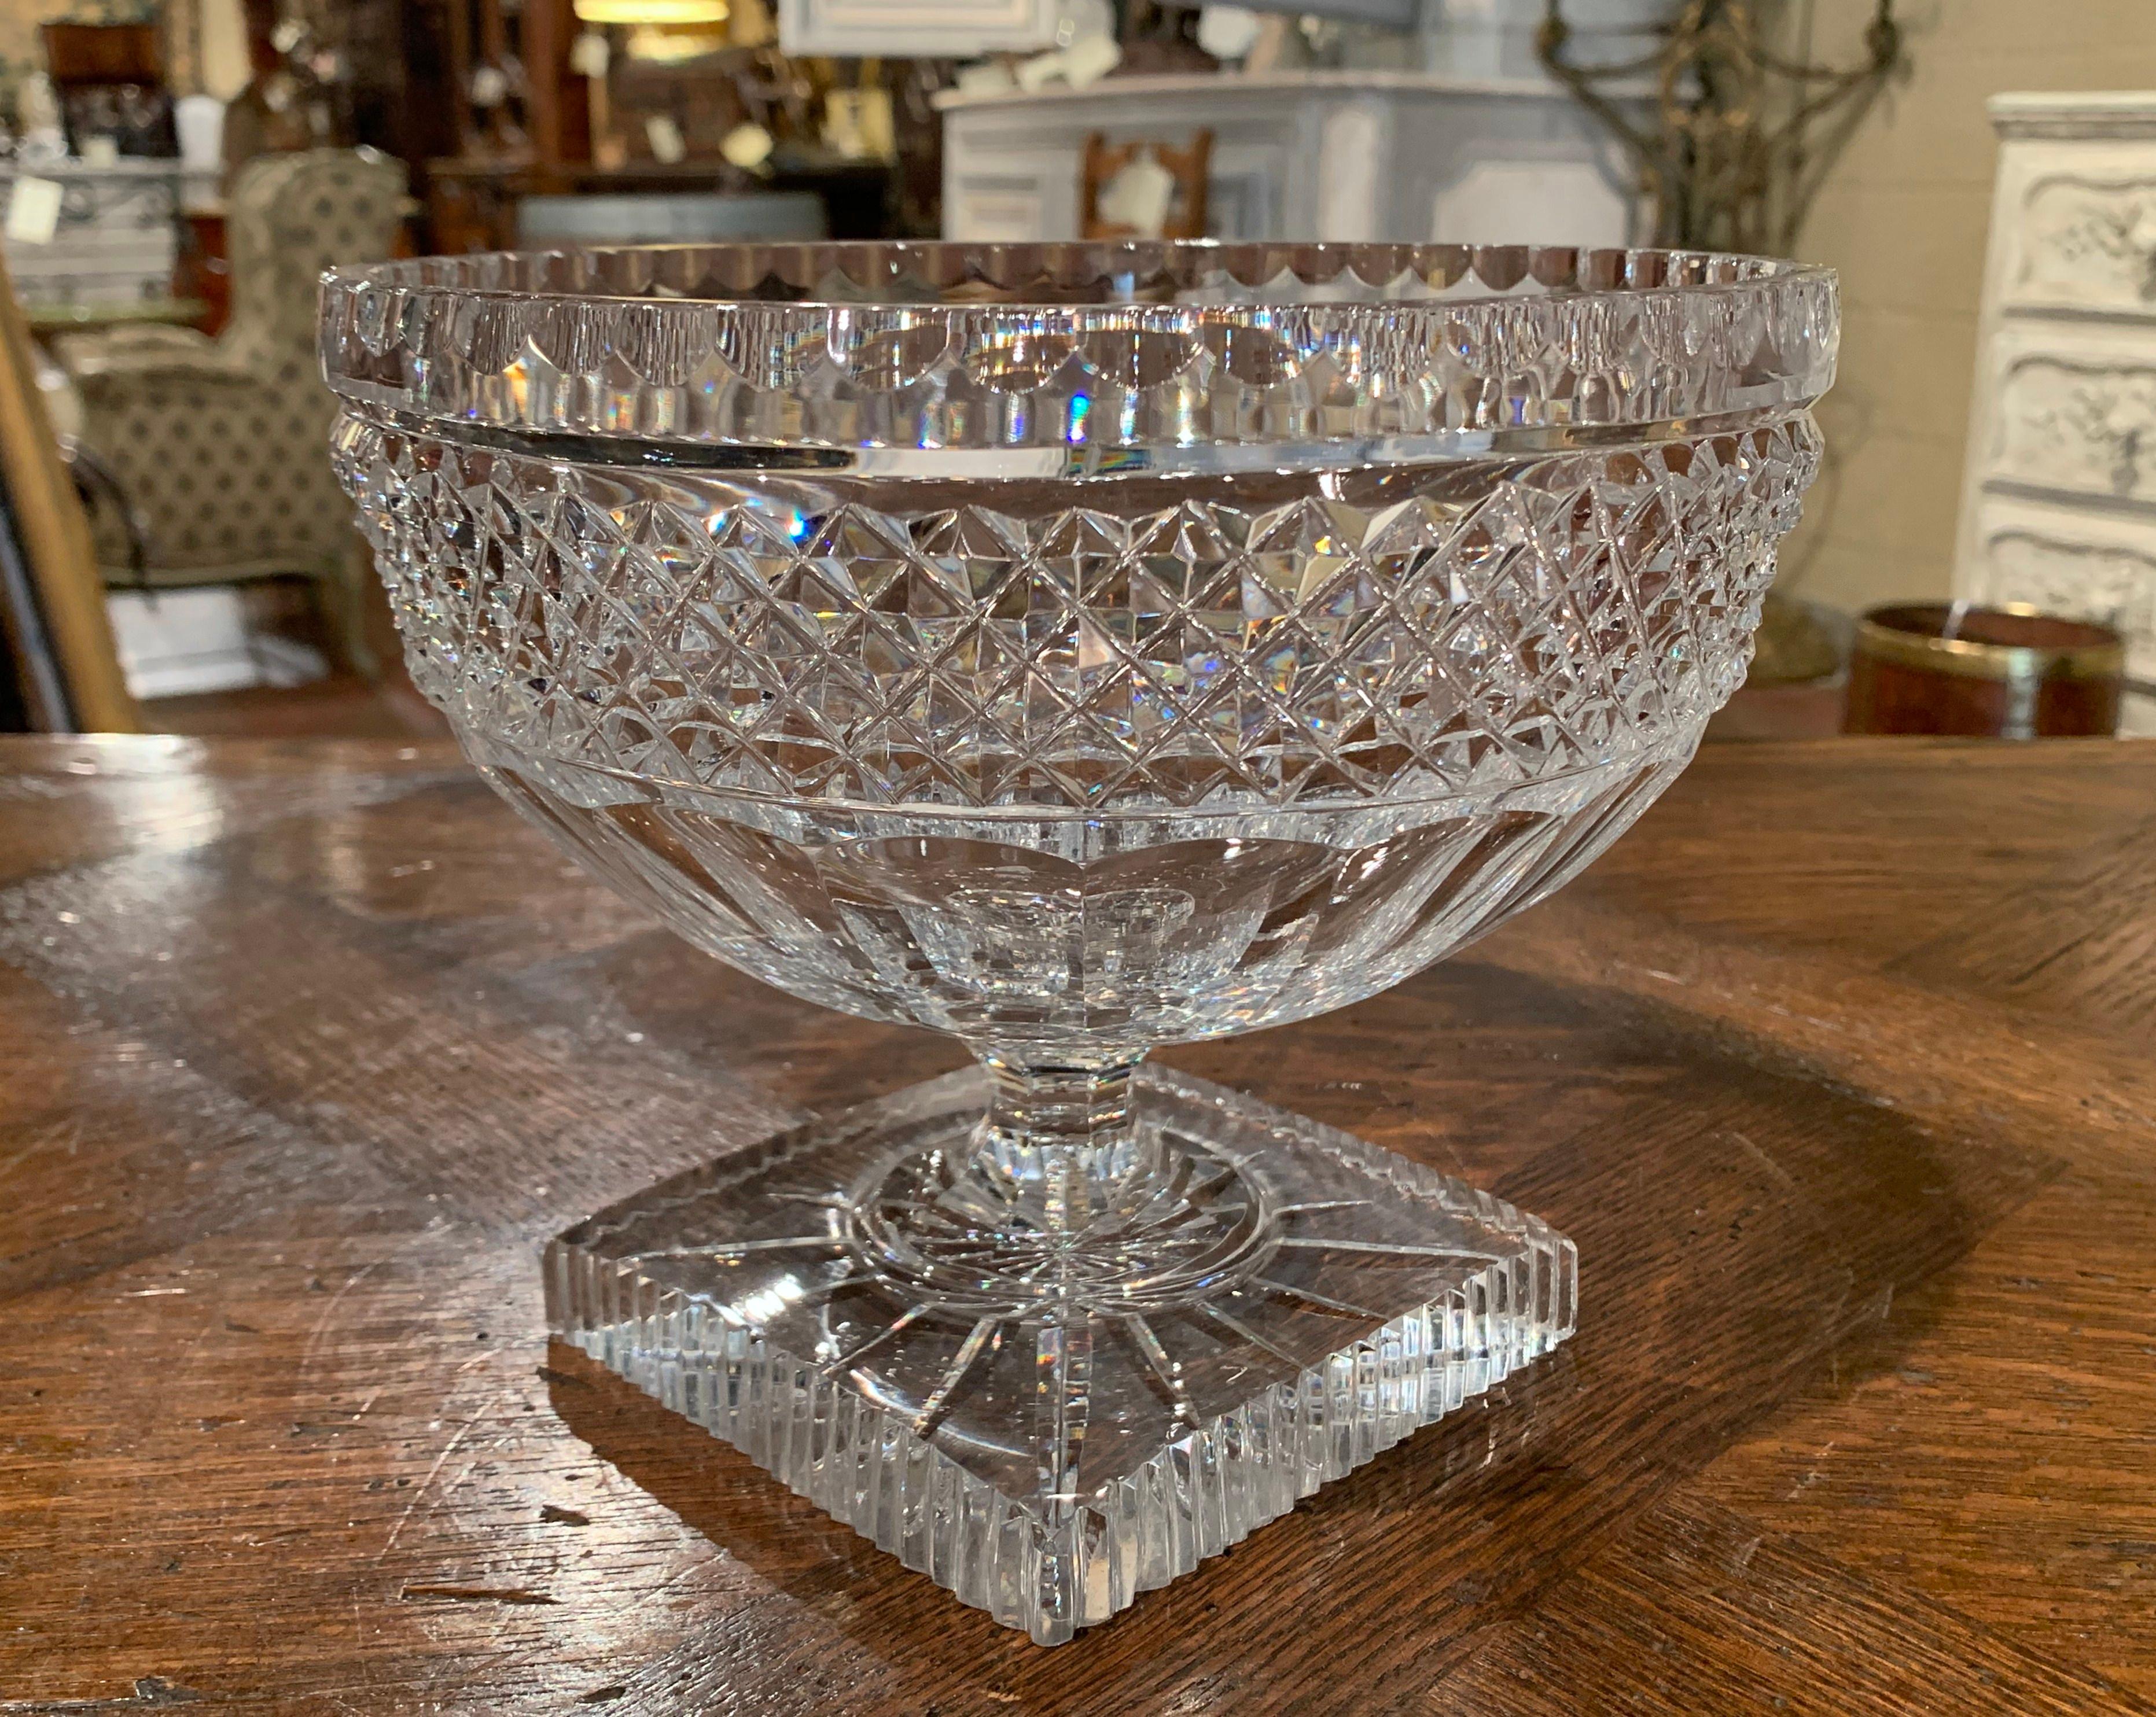 Hand-Crafted Midcentury French Cut Glass Crystal Decorative Compote Centerpiece Bowl